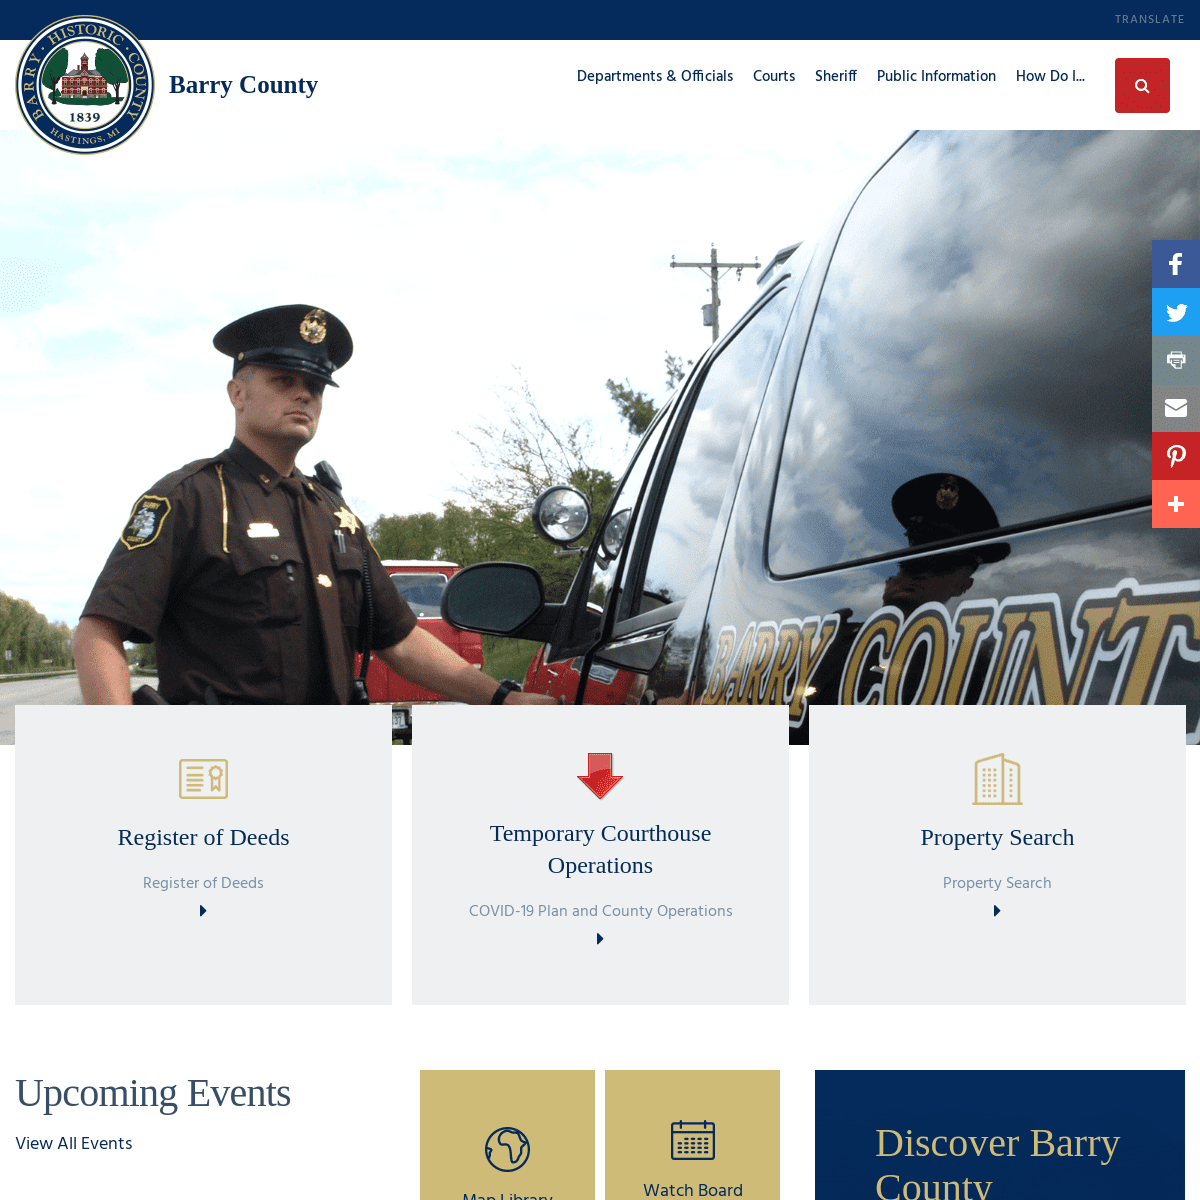 A complete backup of https://barrycounty.org